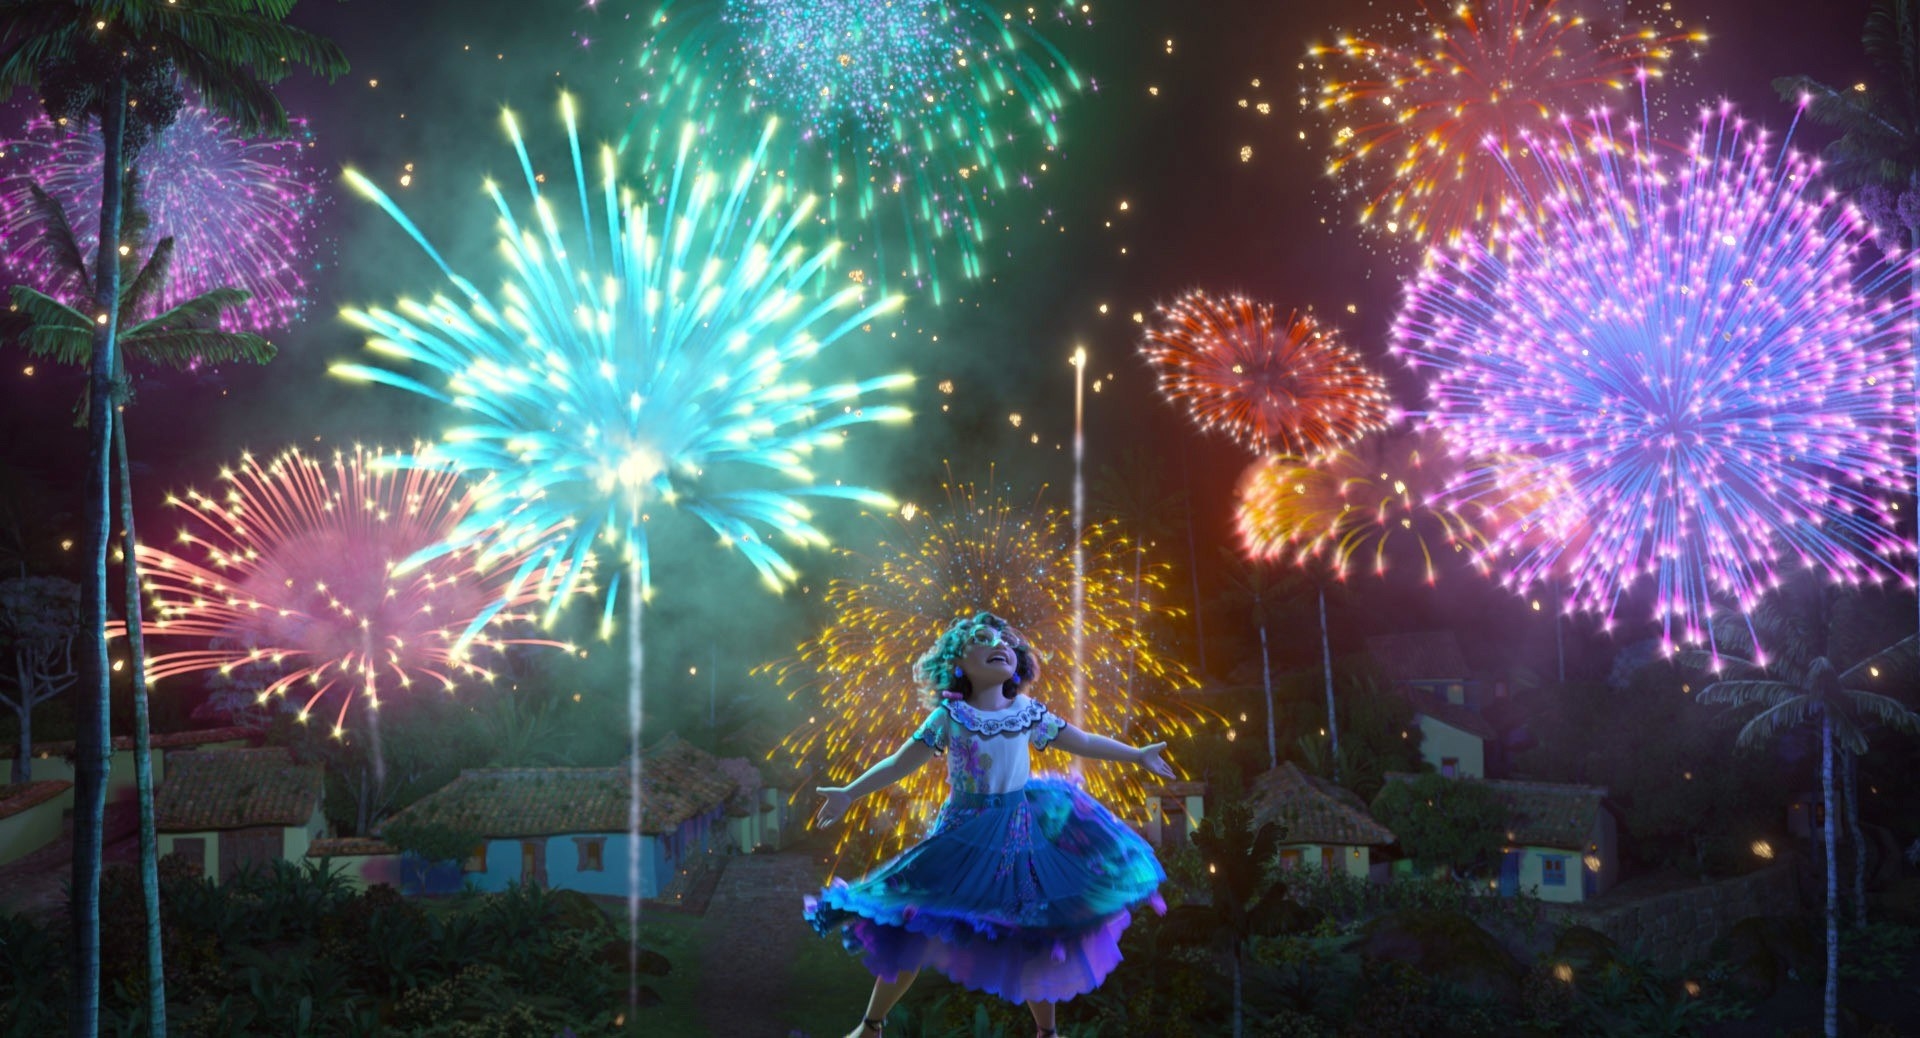 a cartoon character singing and dancing while fireworks go off at night